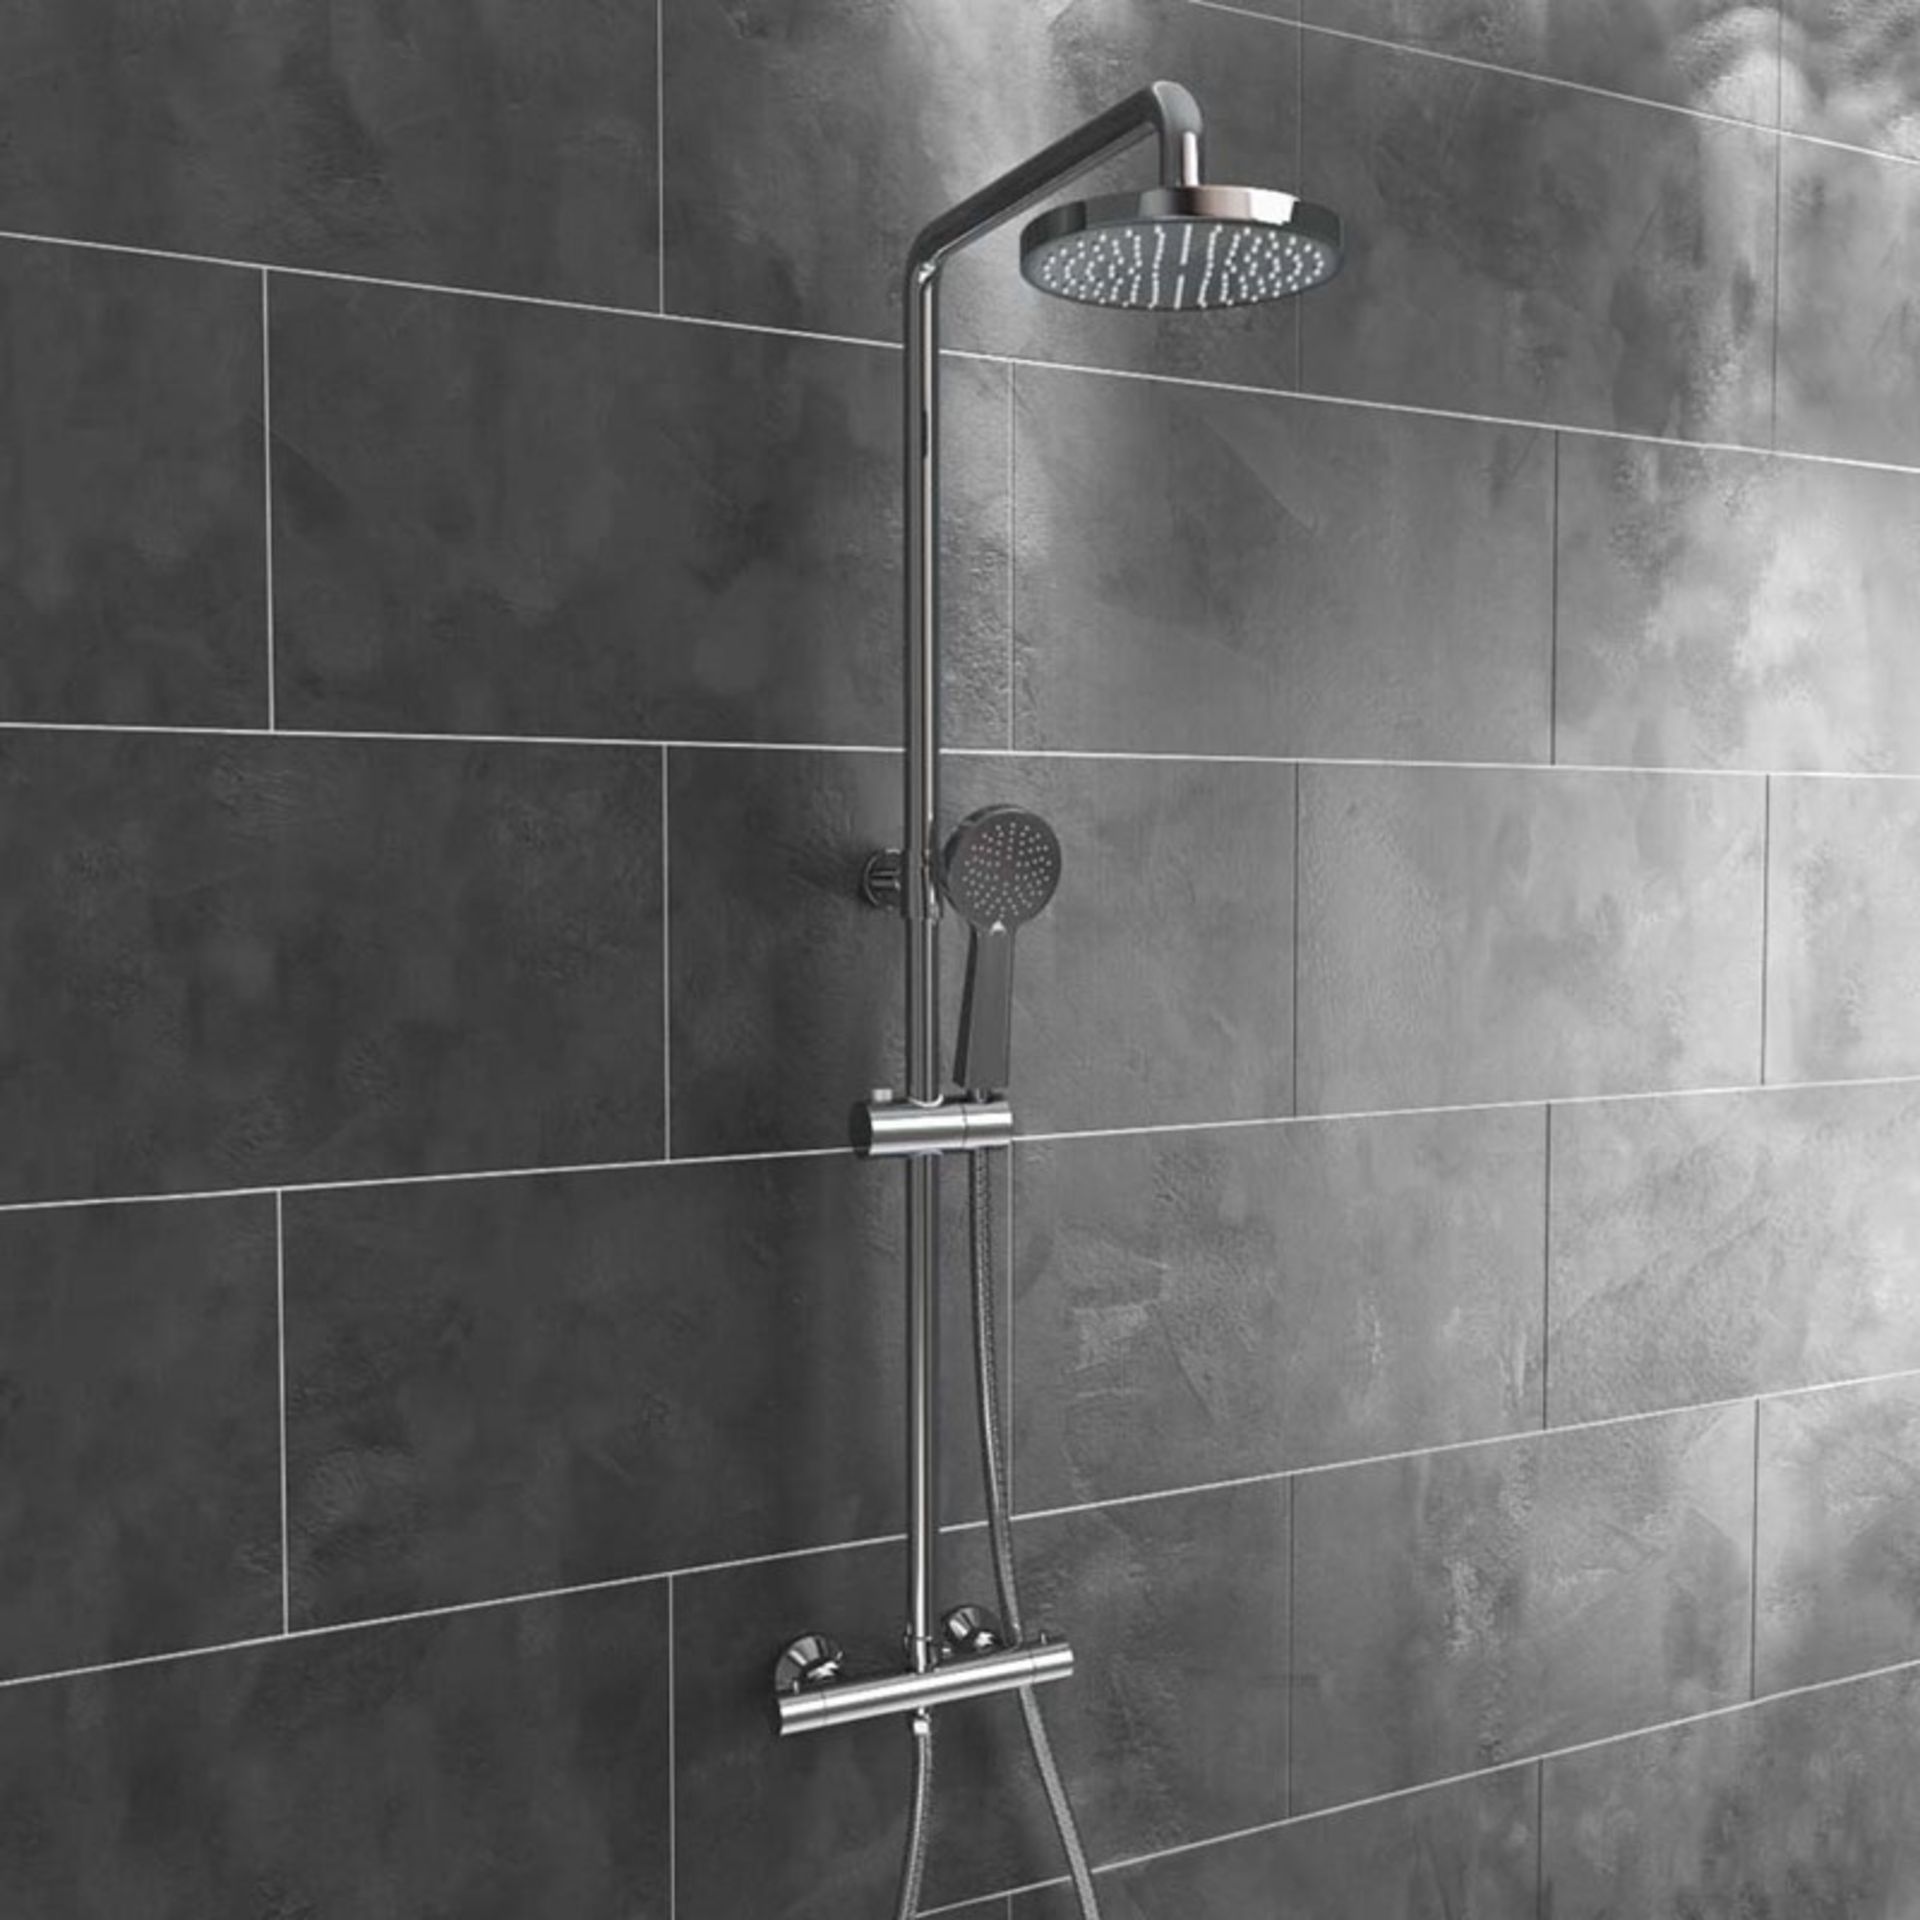 1 x Arley Ontario Thermostatic Shower Kit With Riser Rail, Shower Head and Handset - New - RRP £190 - Image 2 of 3